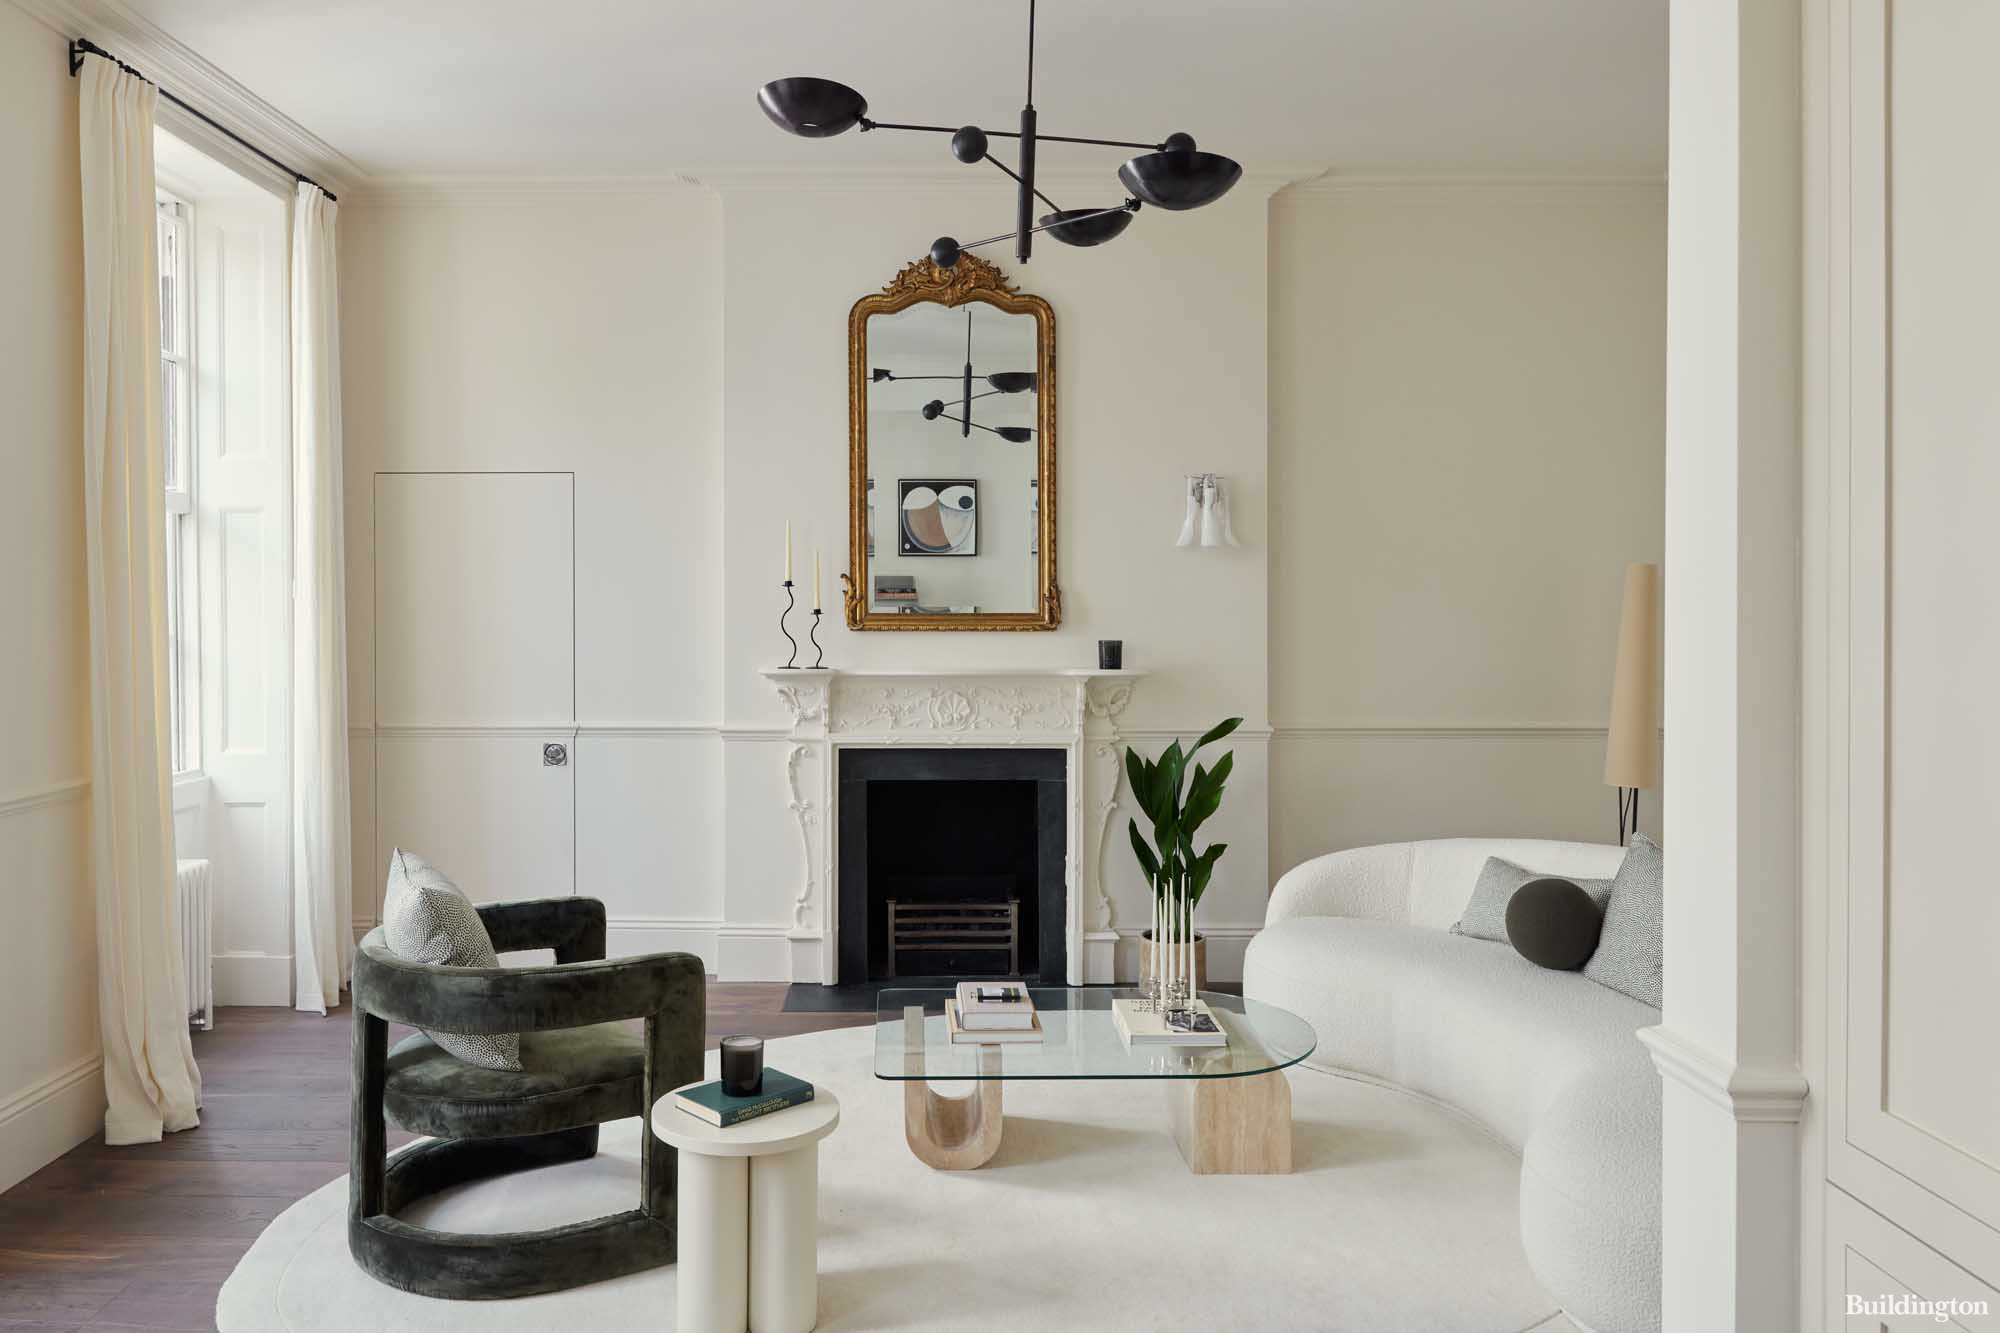 Living Room at the new two-bedroom apartment transformed by VOZA Developments at 1-2 Halkin Street in Belgravia, London W1.